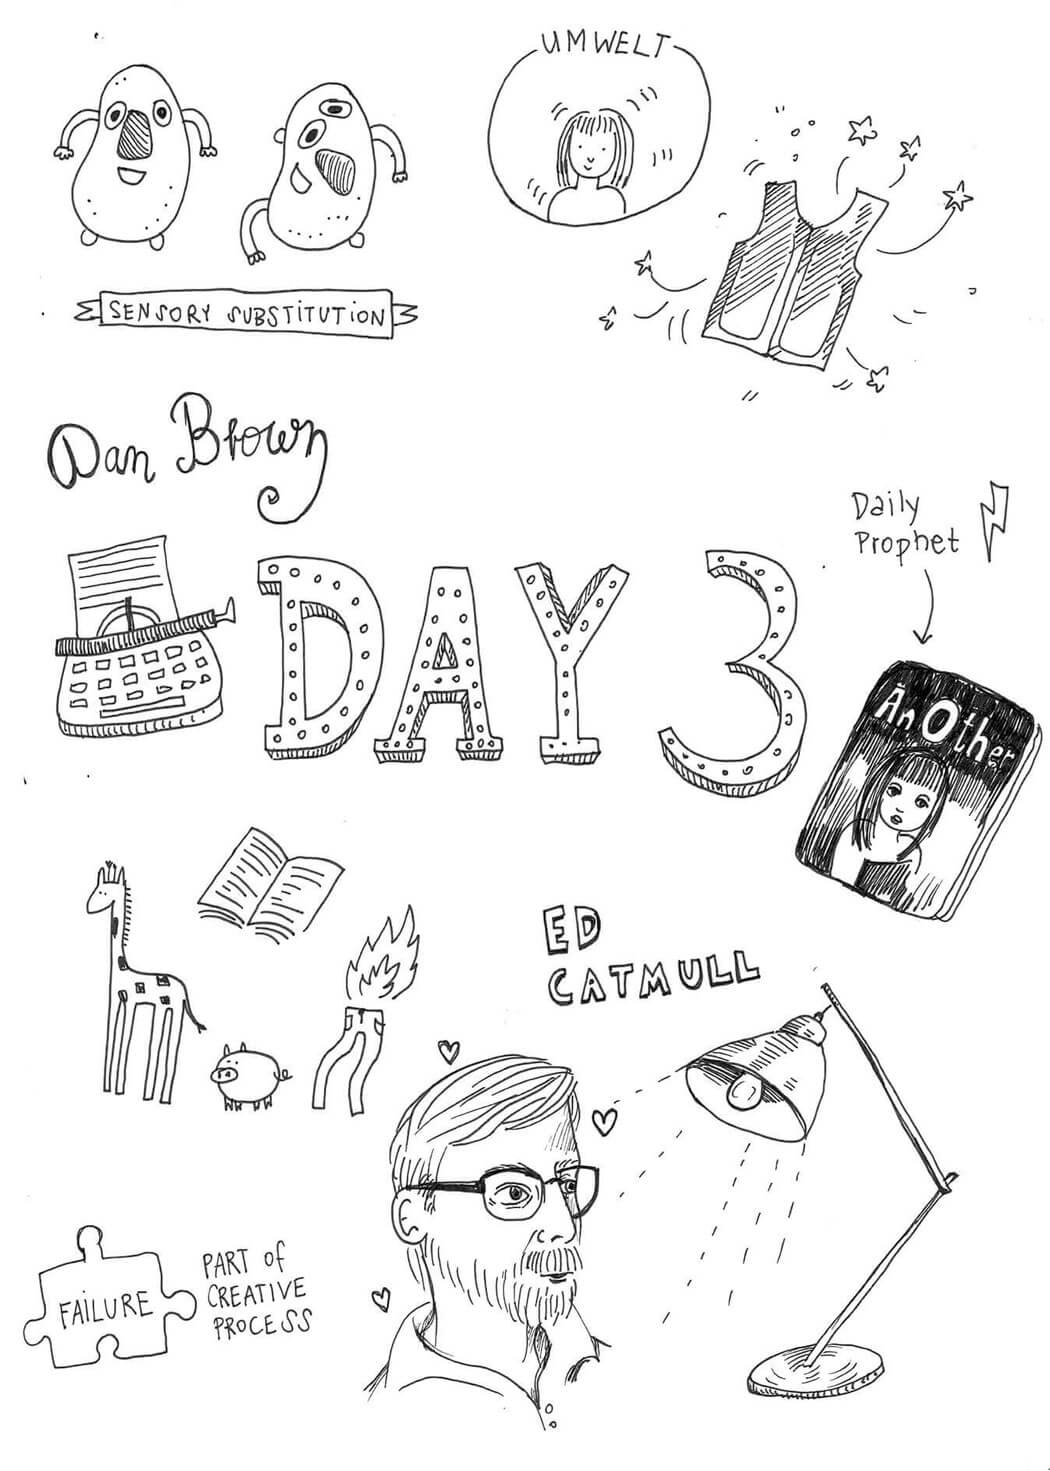 Illustrated notes from Web Summit Day 3